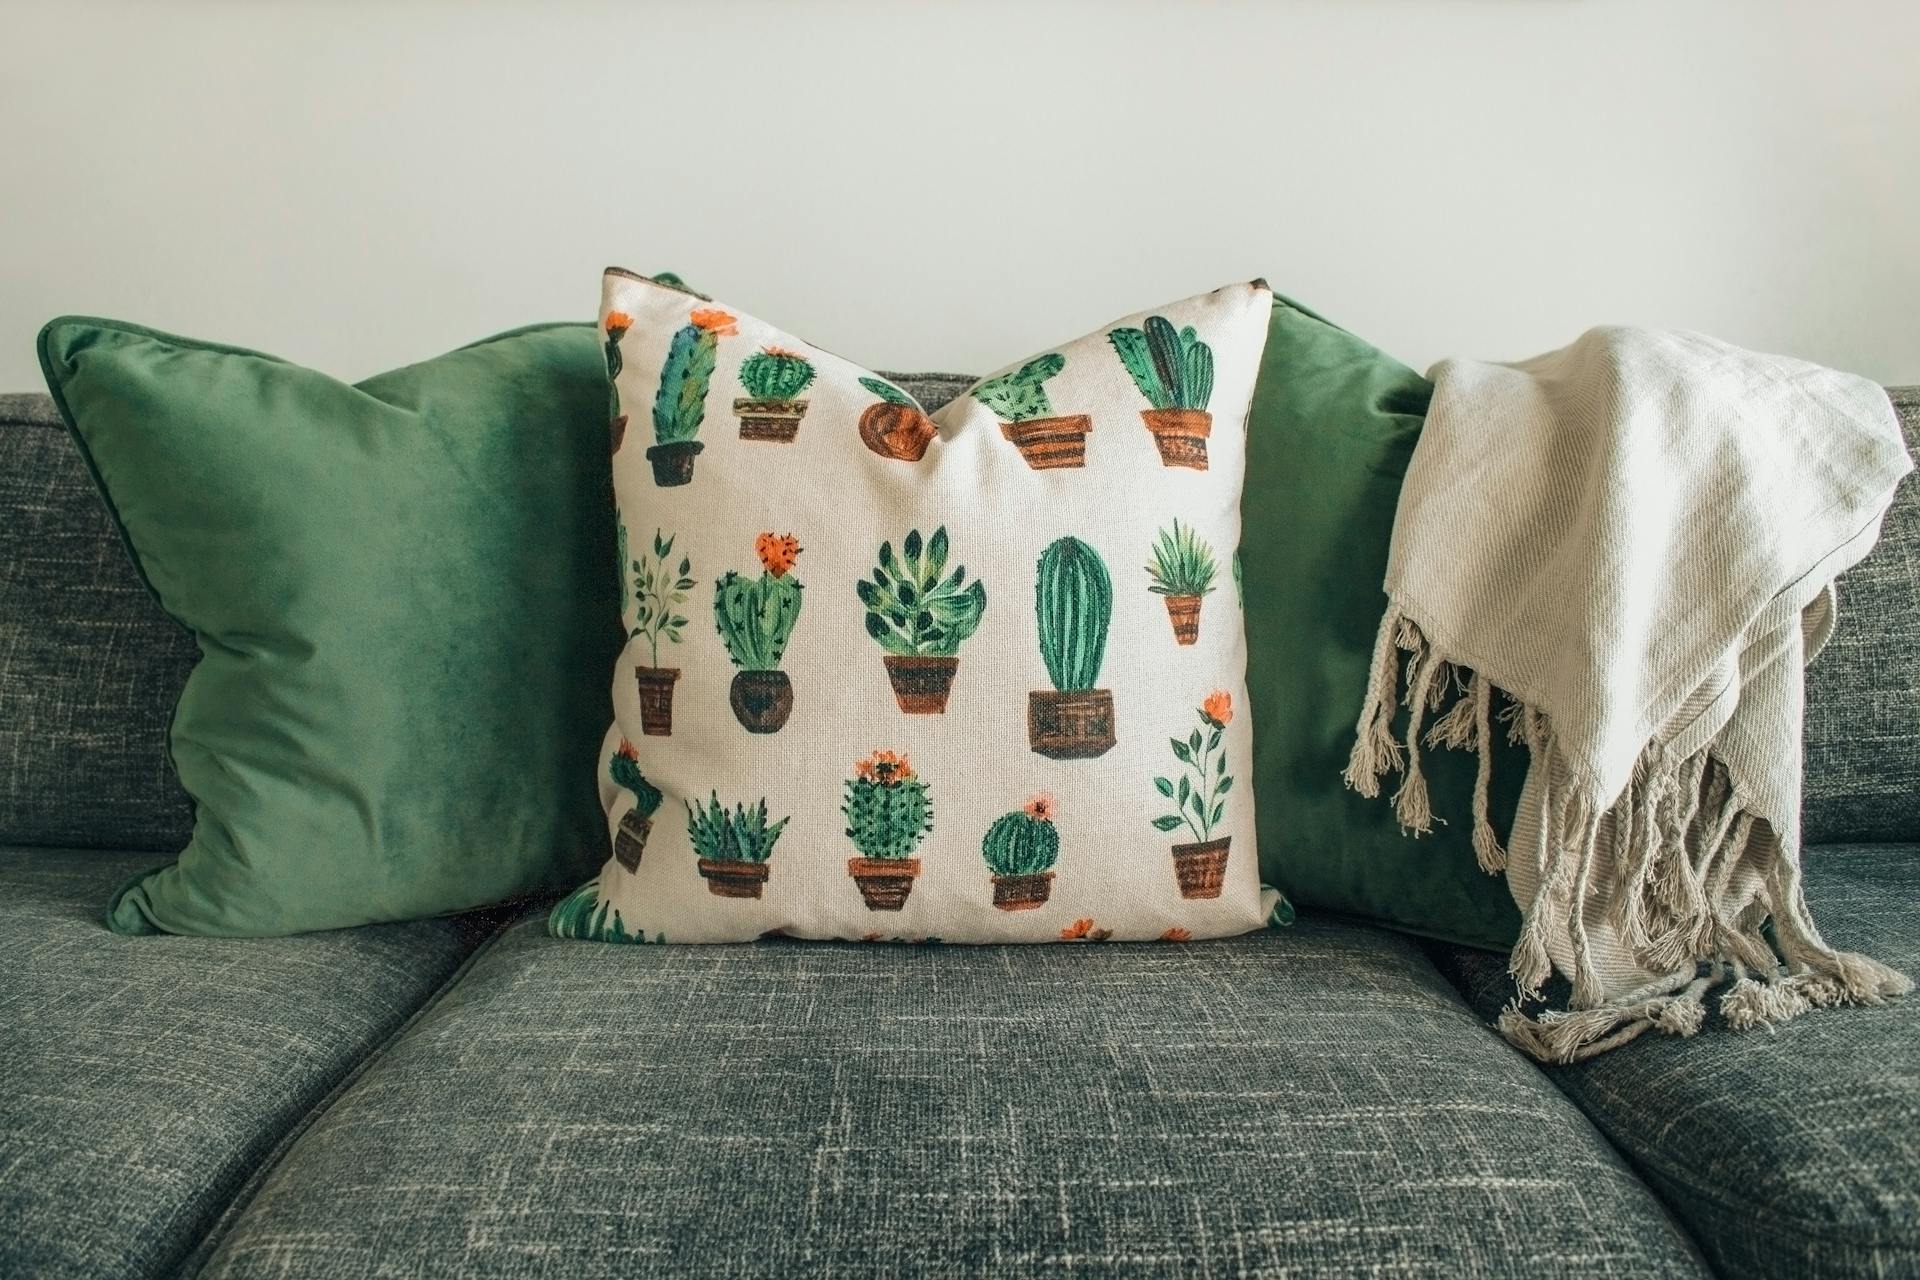 White and green pillows on a couch | Source: Pexels